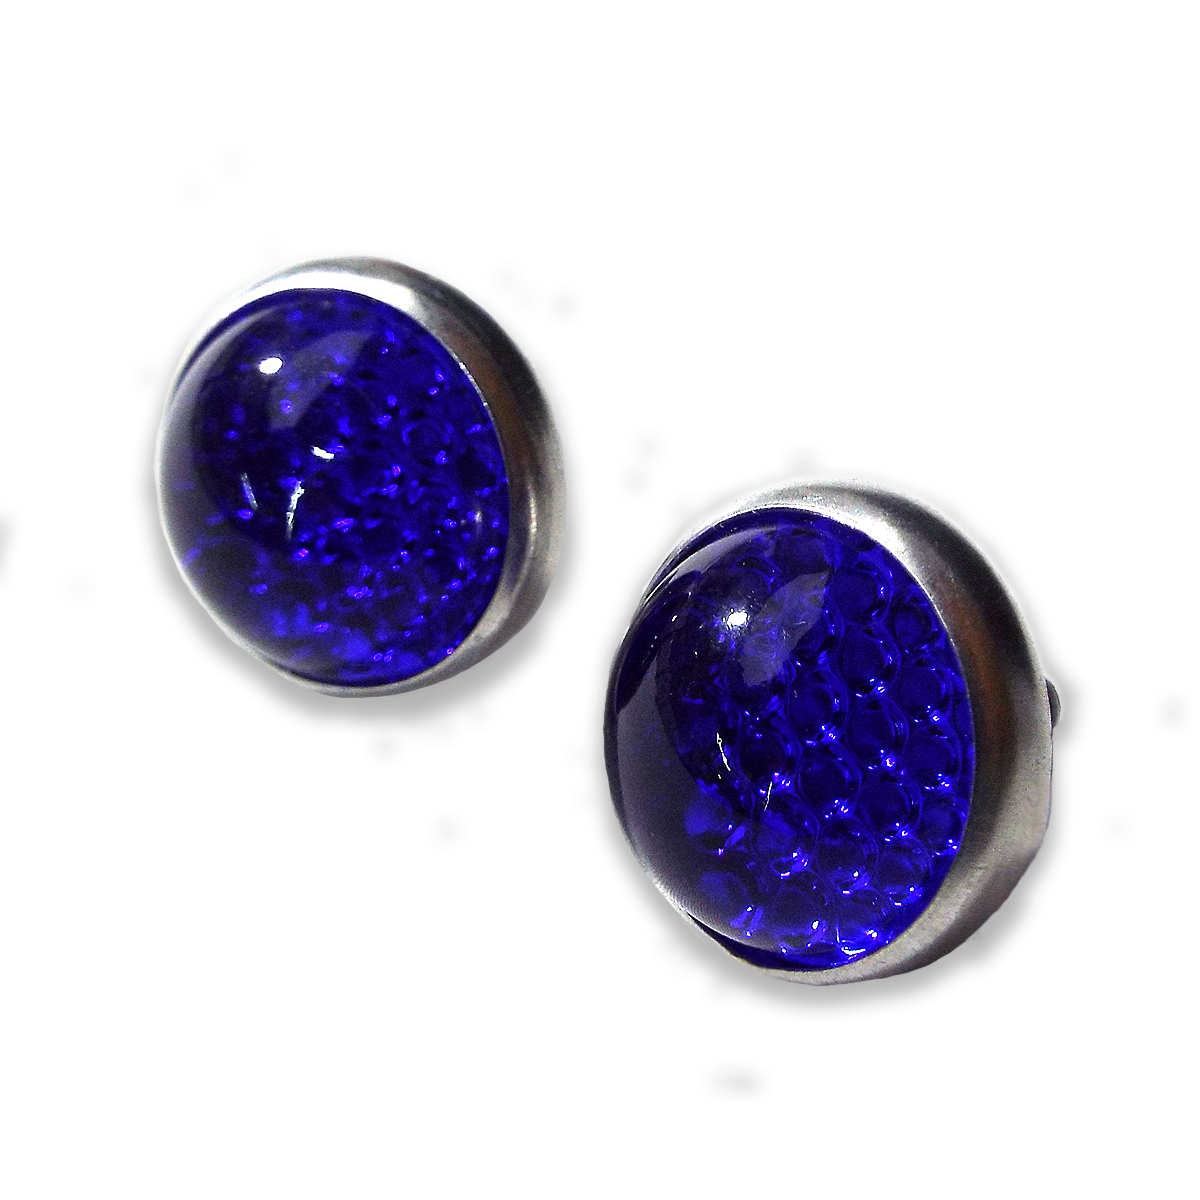 Reflector License Plate Fasteners Blue Glass Reflective Jewels Chevrolet and GMC Pickup Truck